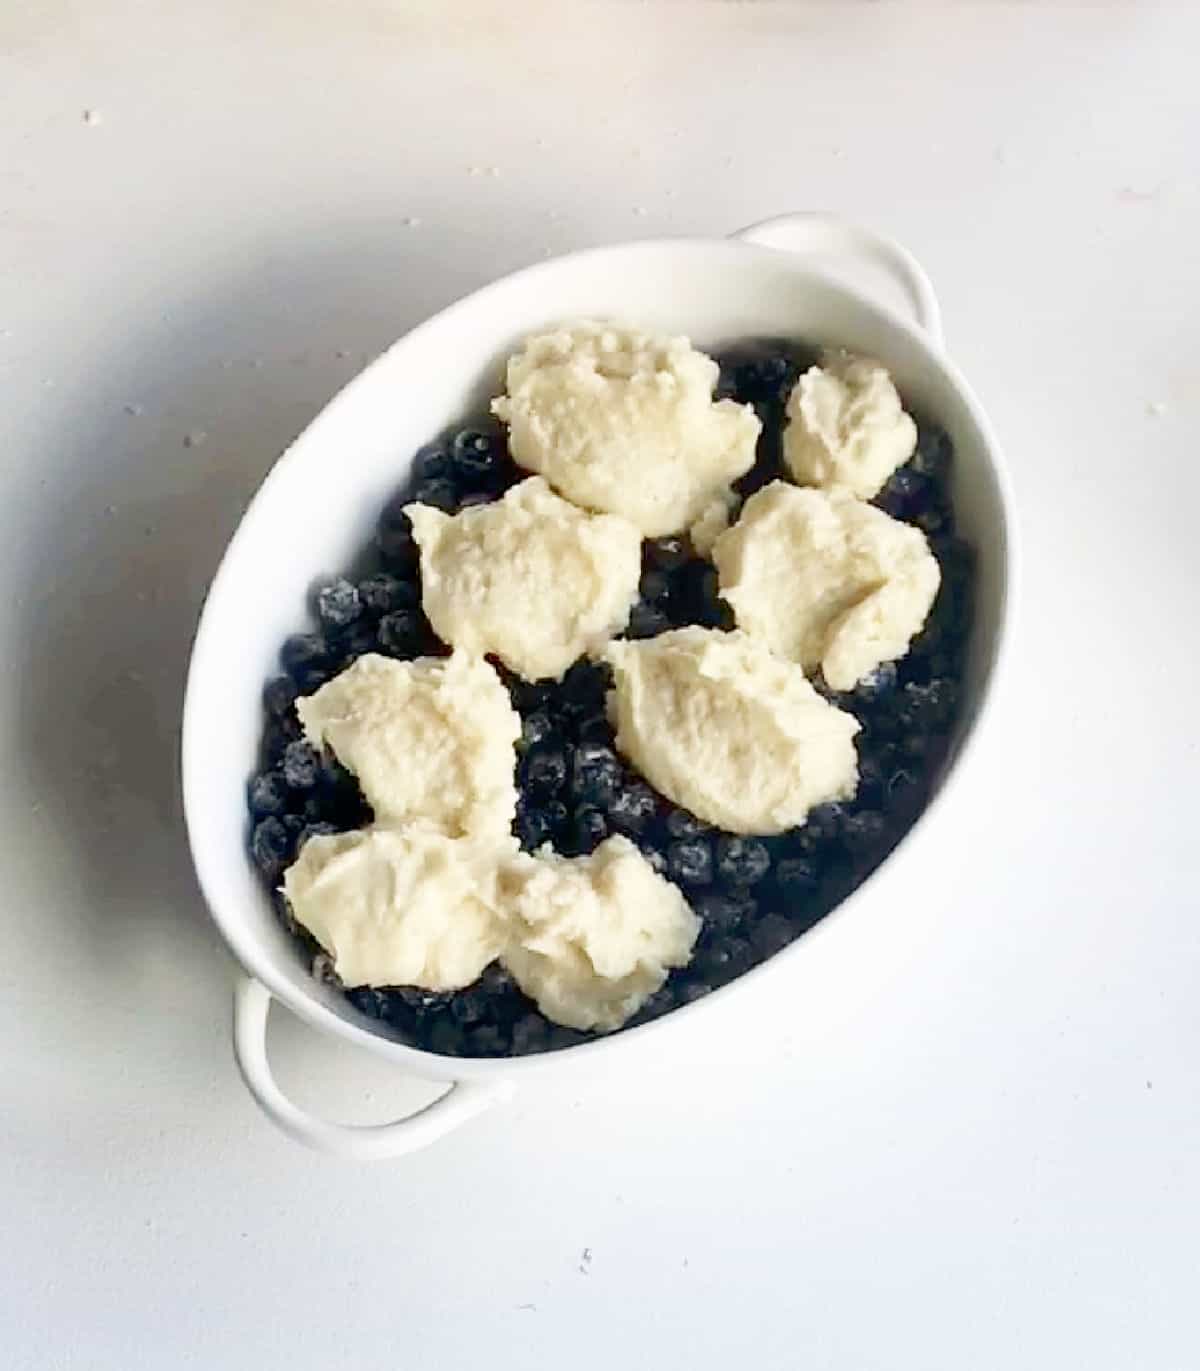 Top view of oval white dish with unbaked blueberry cobbler on a white surface